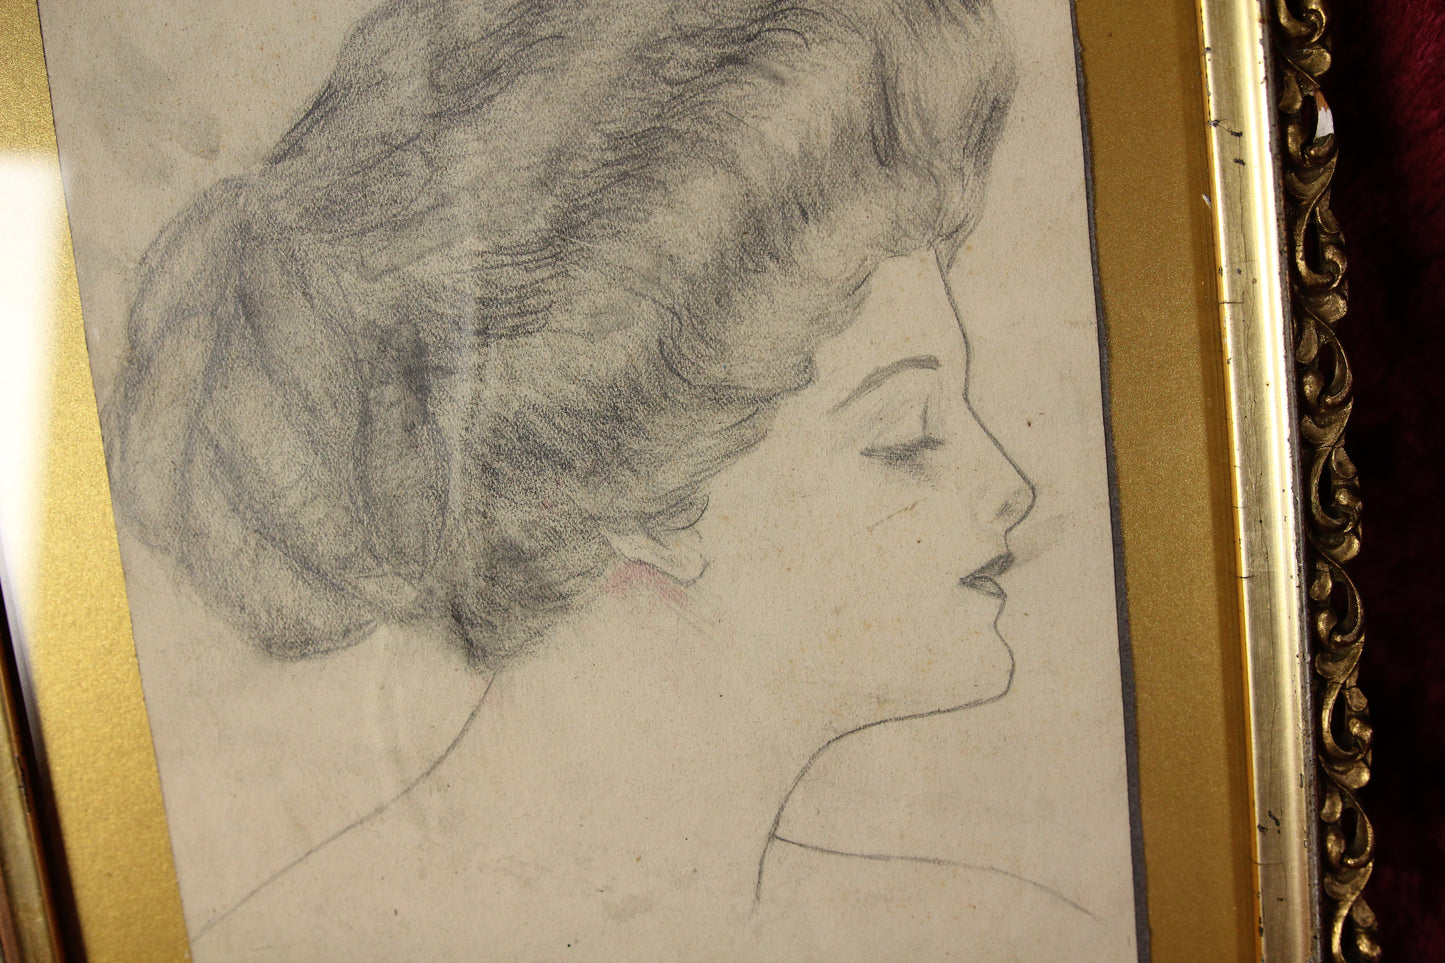 Hand Drawn Antique Pencil Sketch of a Gibson Girl in Frame